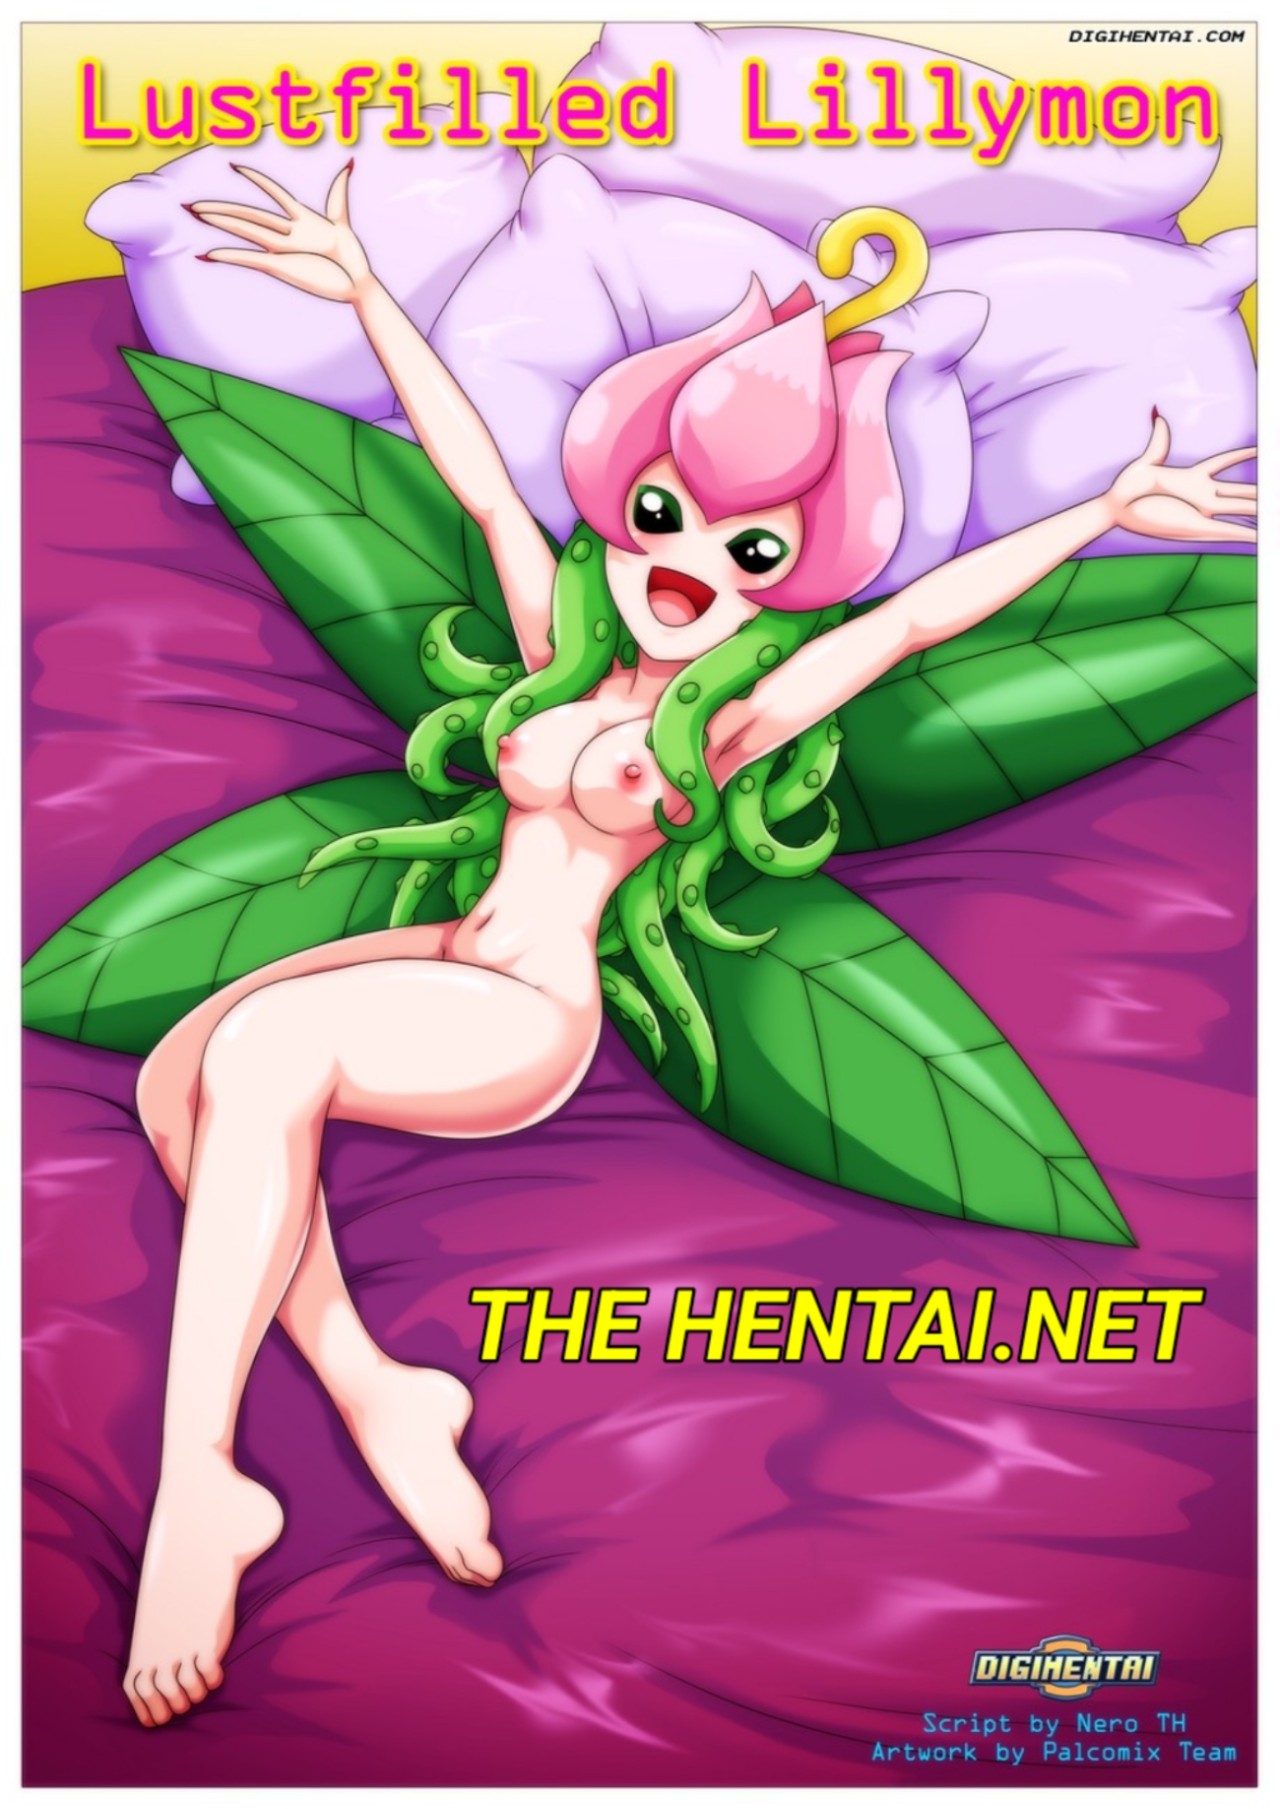 Lustfilled Lillymon Hentai pt-br 01